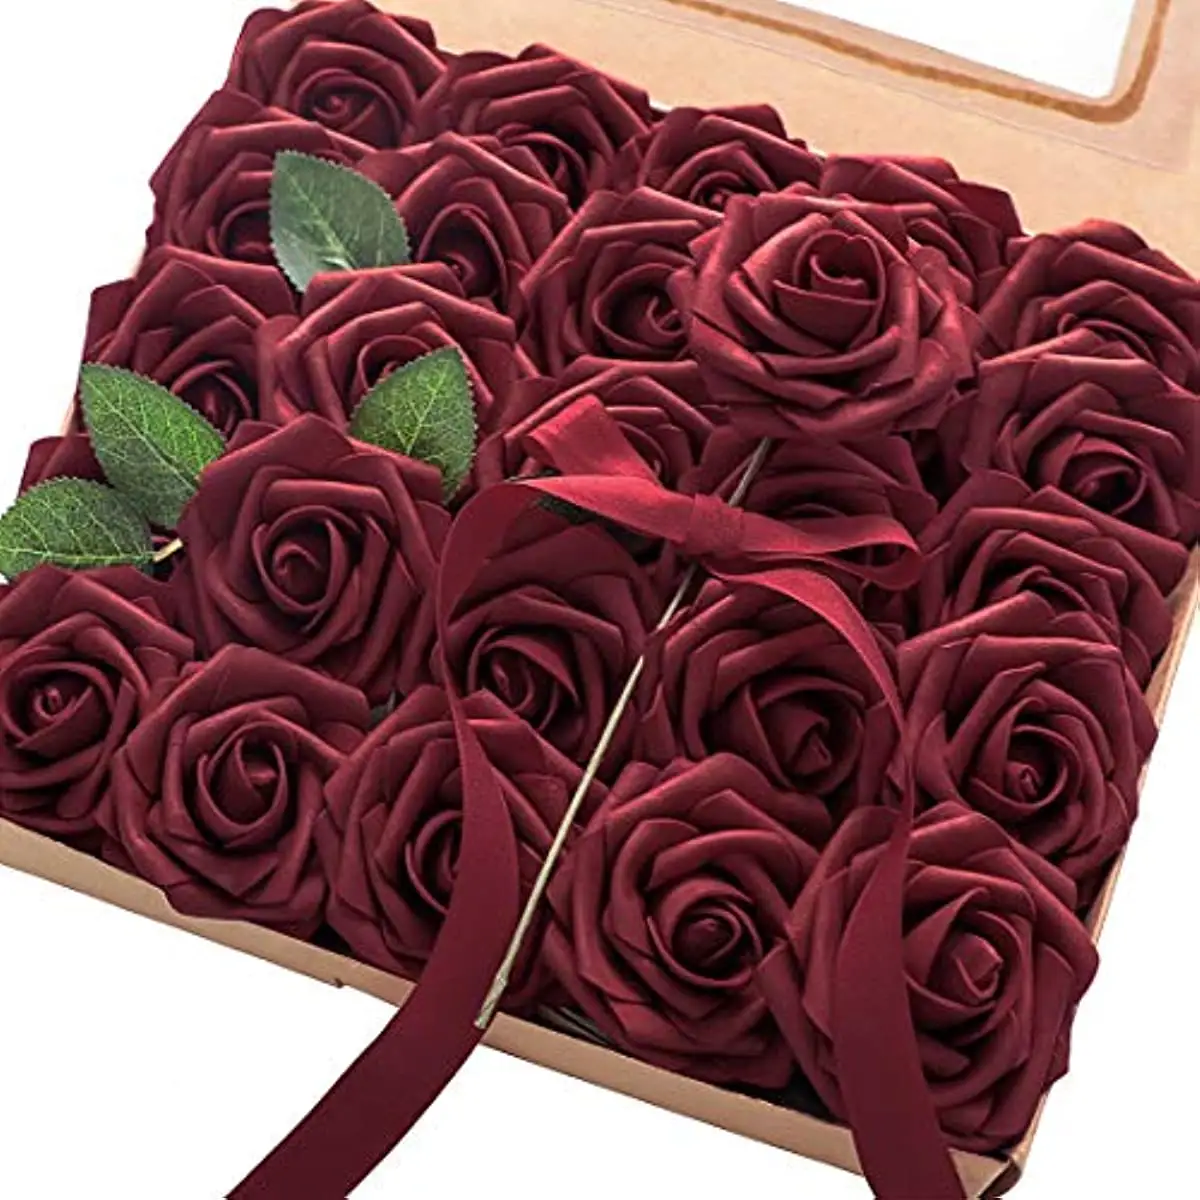 25pcs Roses Real Touch 7cm Looking Burgundy Foam Fake Roses with Stems Rose Artificial Flower for Wedding Home Decoration